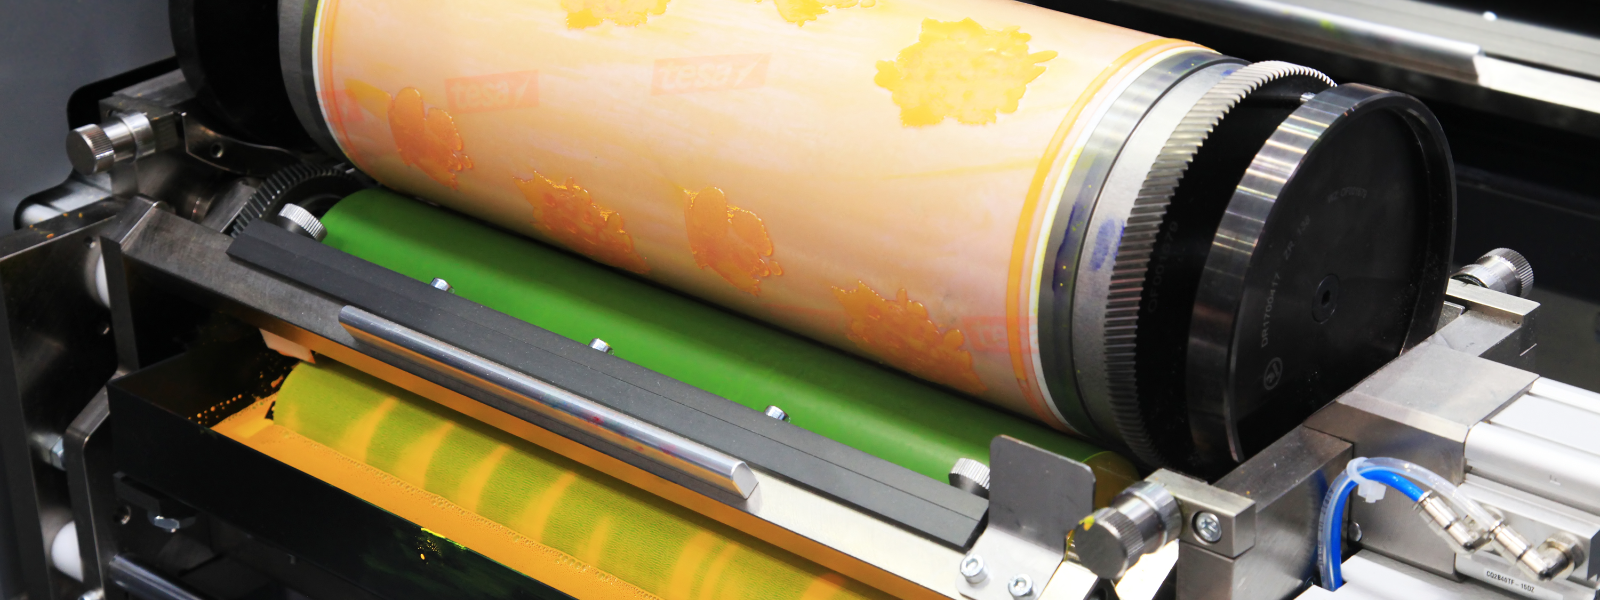 JAUS TEENUS OÜ - We offer comprehensive printing services, specializing in labels and thermal transfer ribbons.